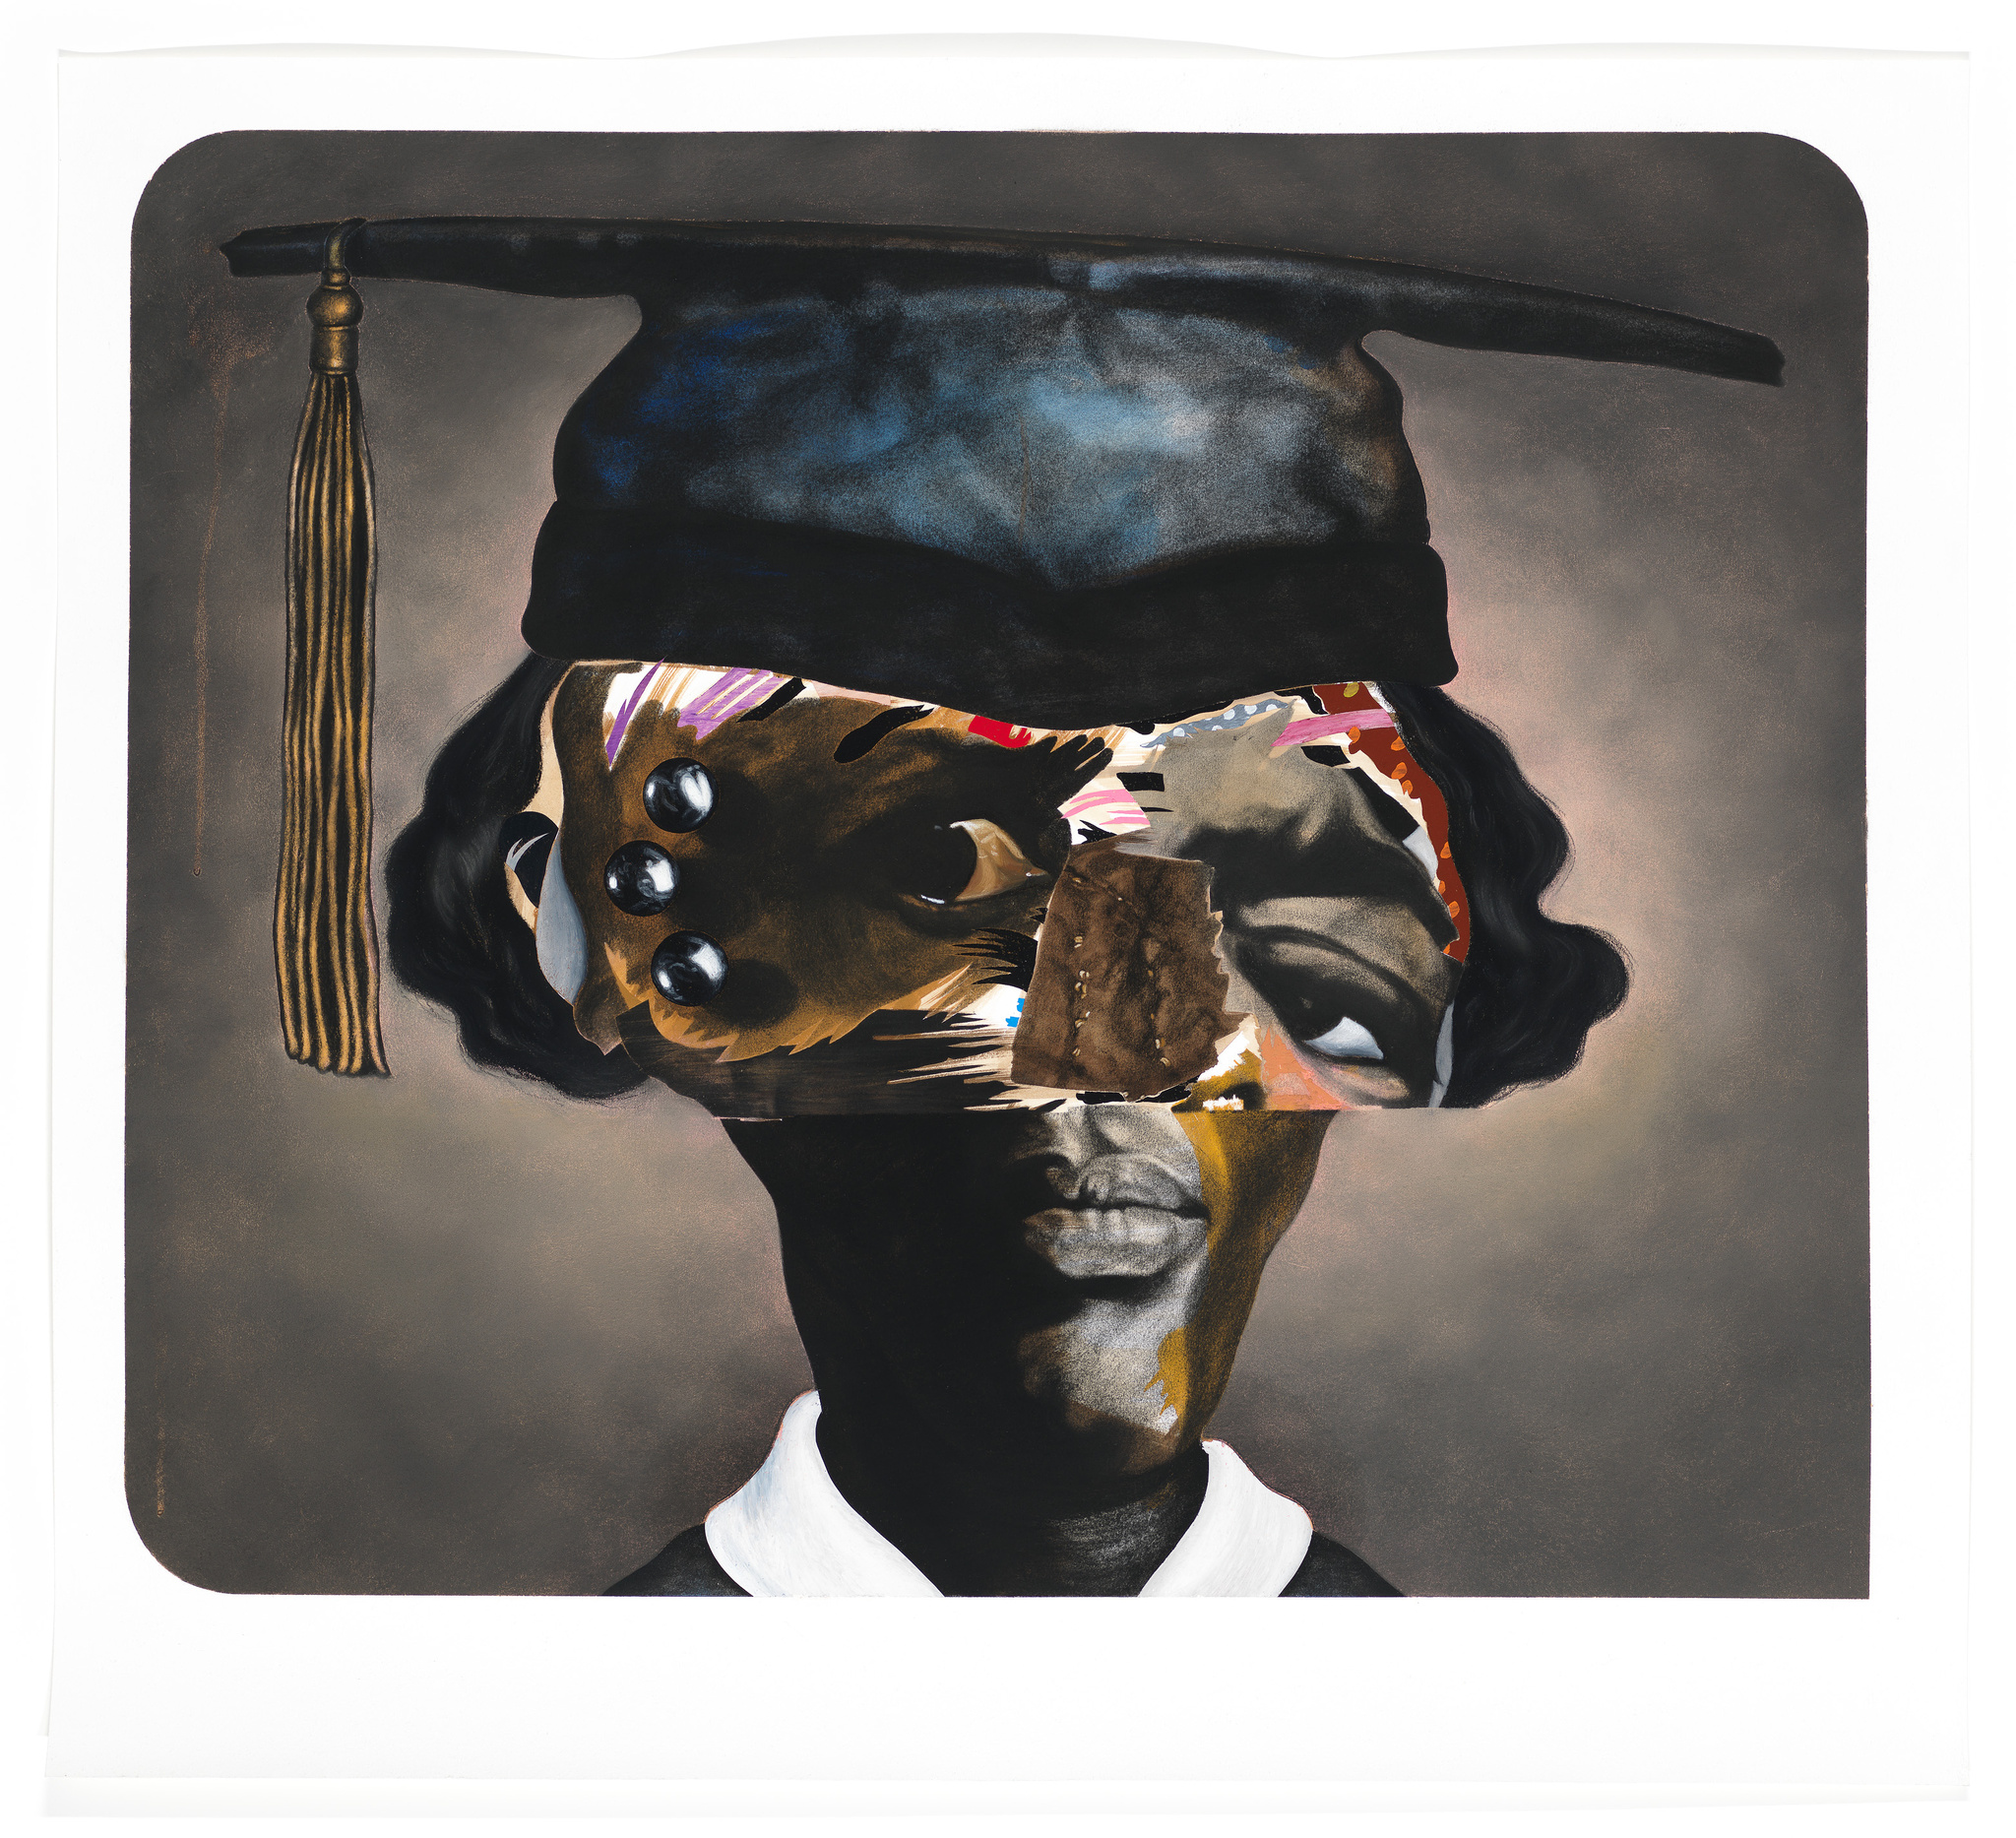 A Black person in a cap and gown, their eyes repositioned and mixed with colorful shapes like strewn puzzle pieces.